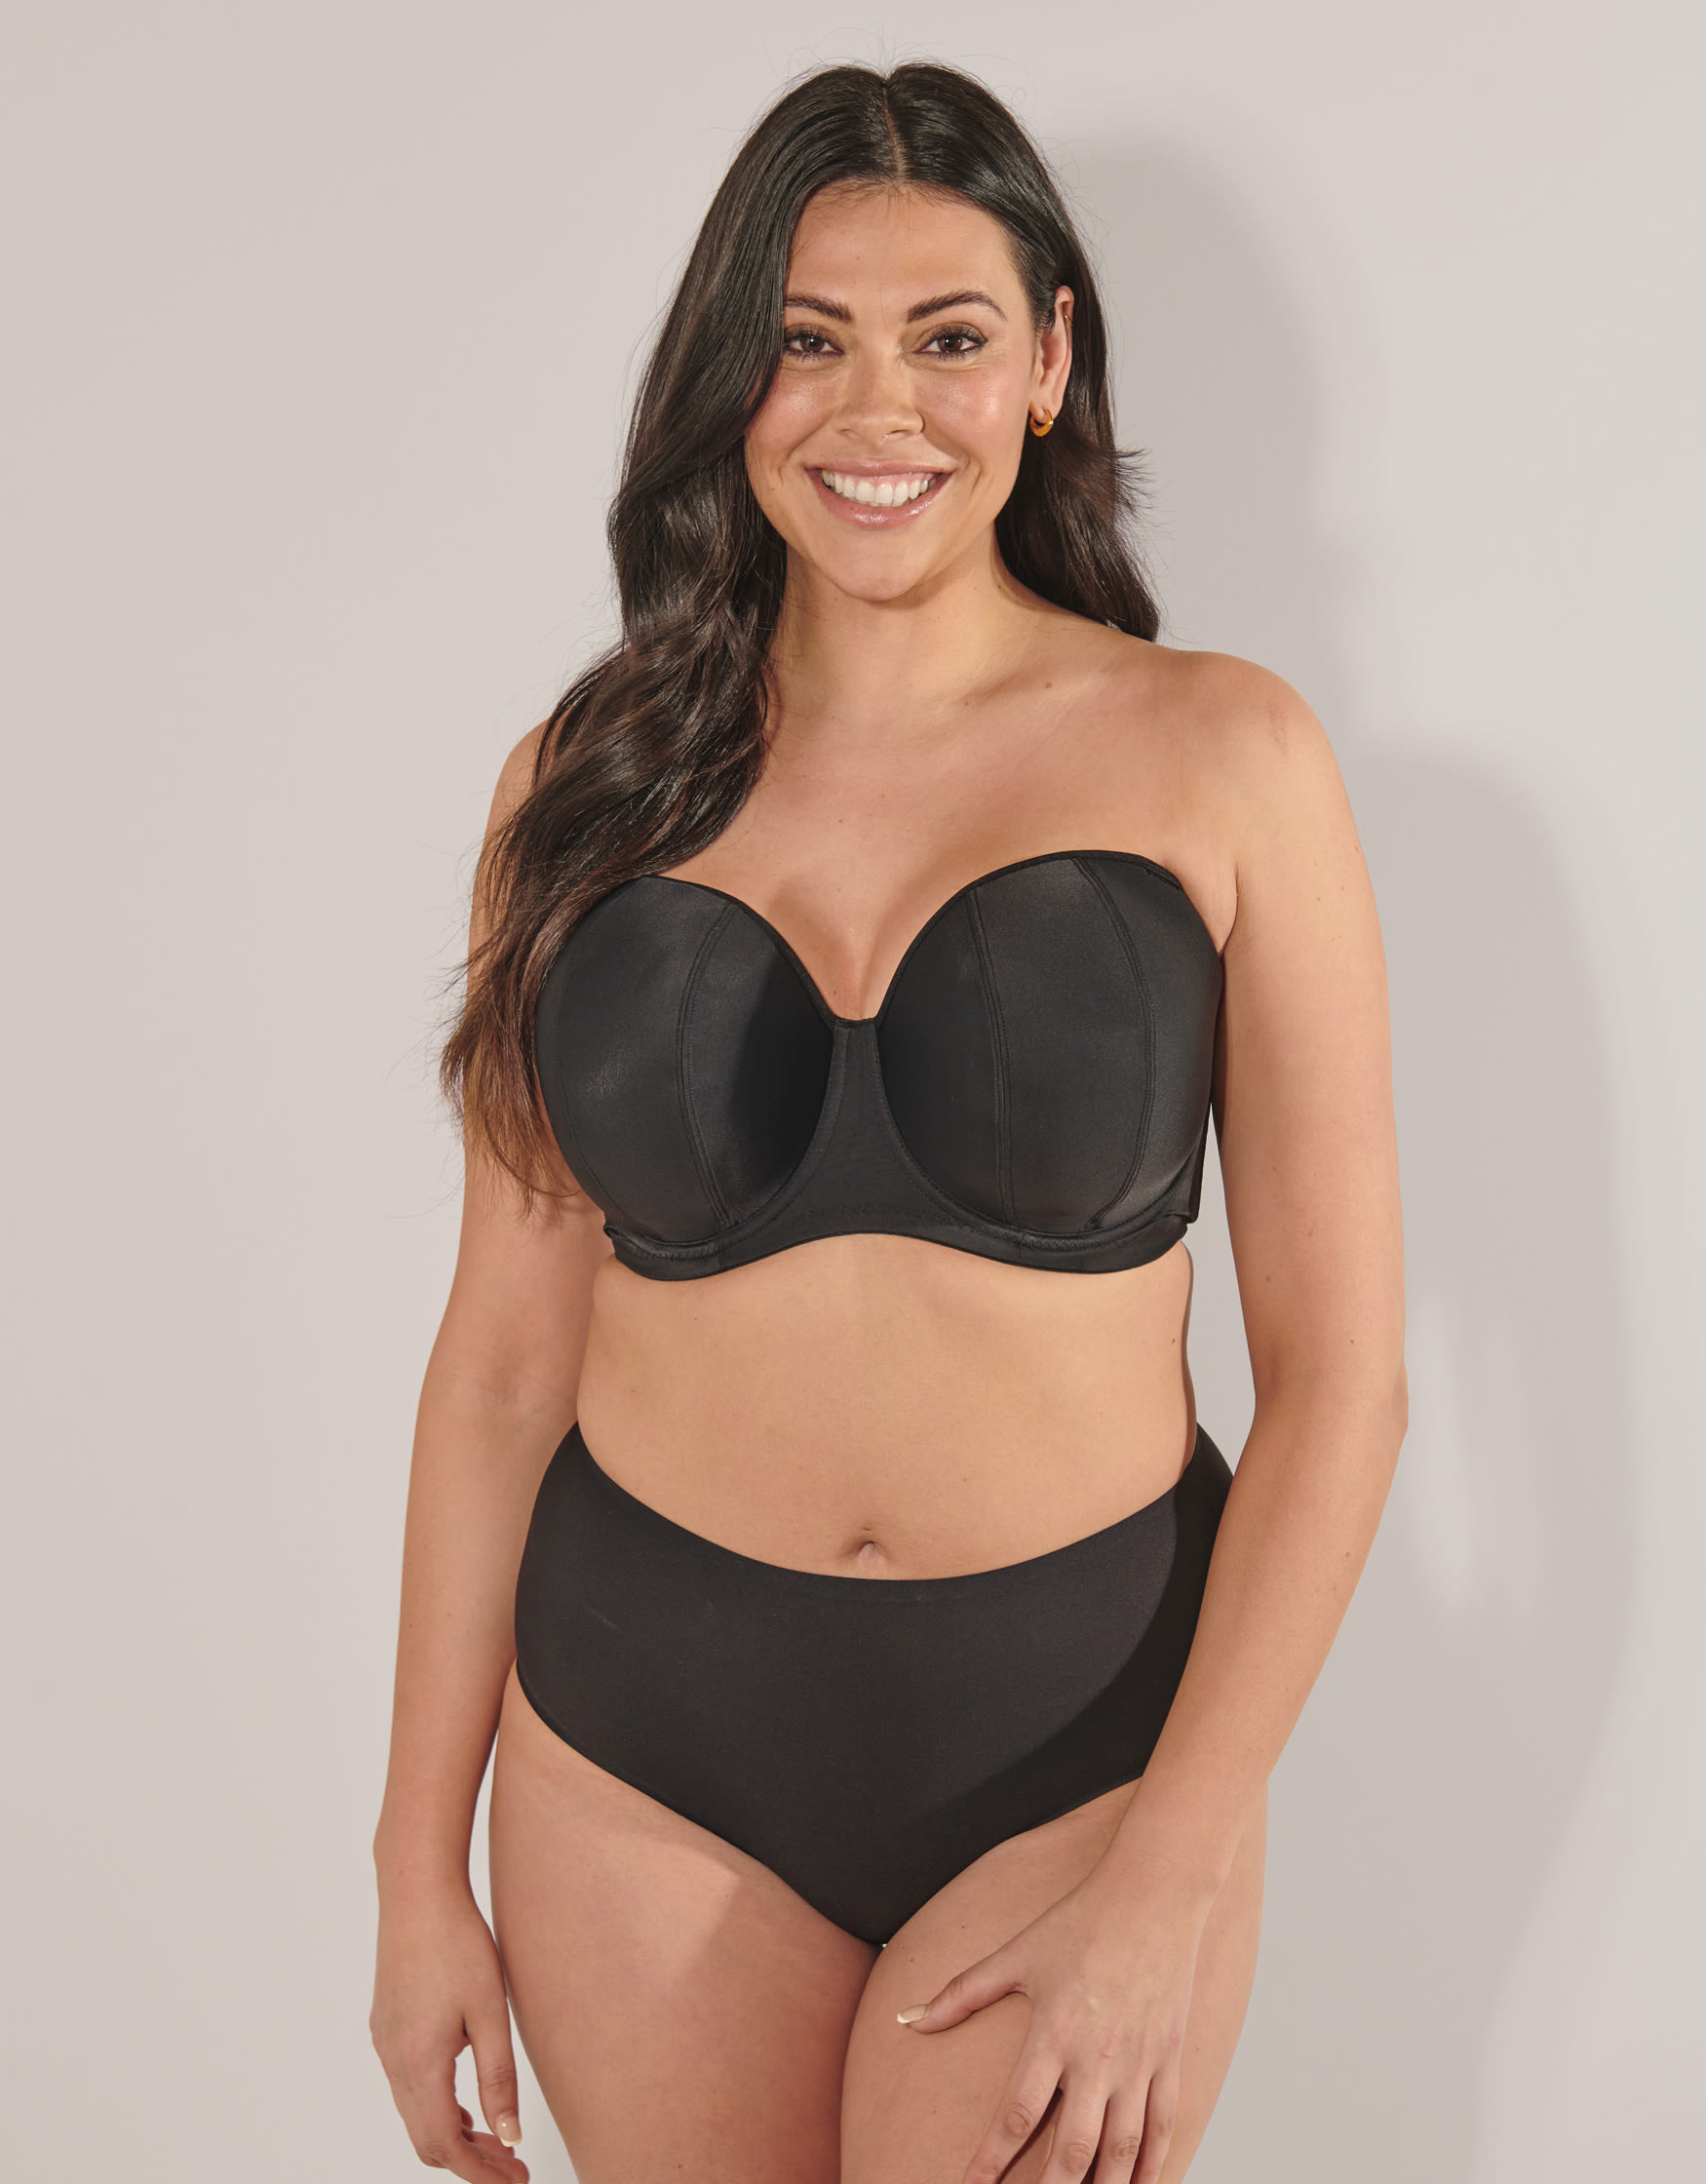 DD+ Strapless Bras, Multiway and Strapless Bras for Big Busts